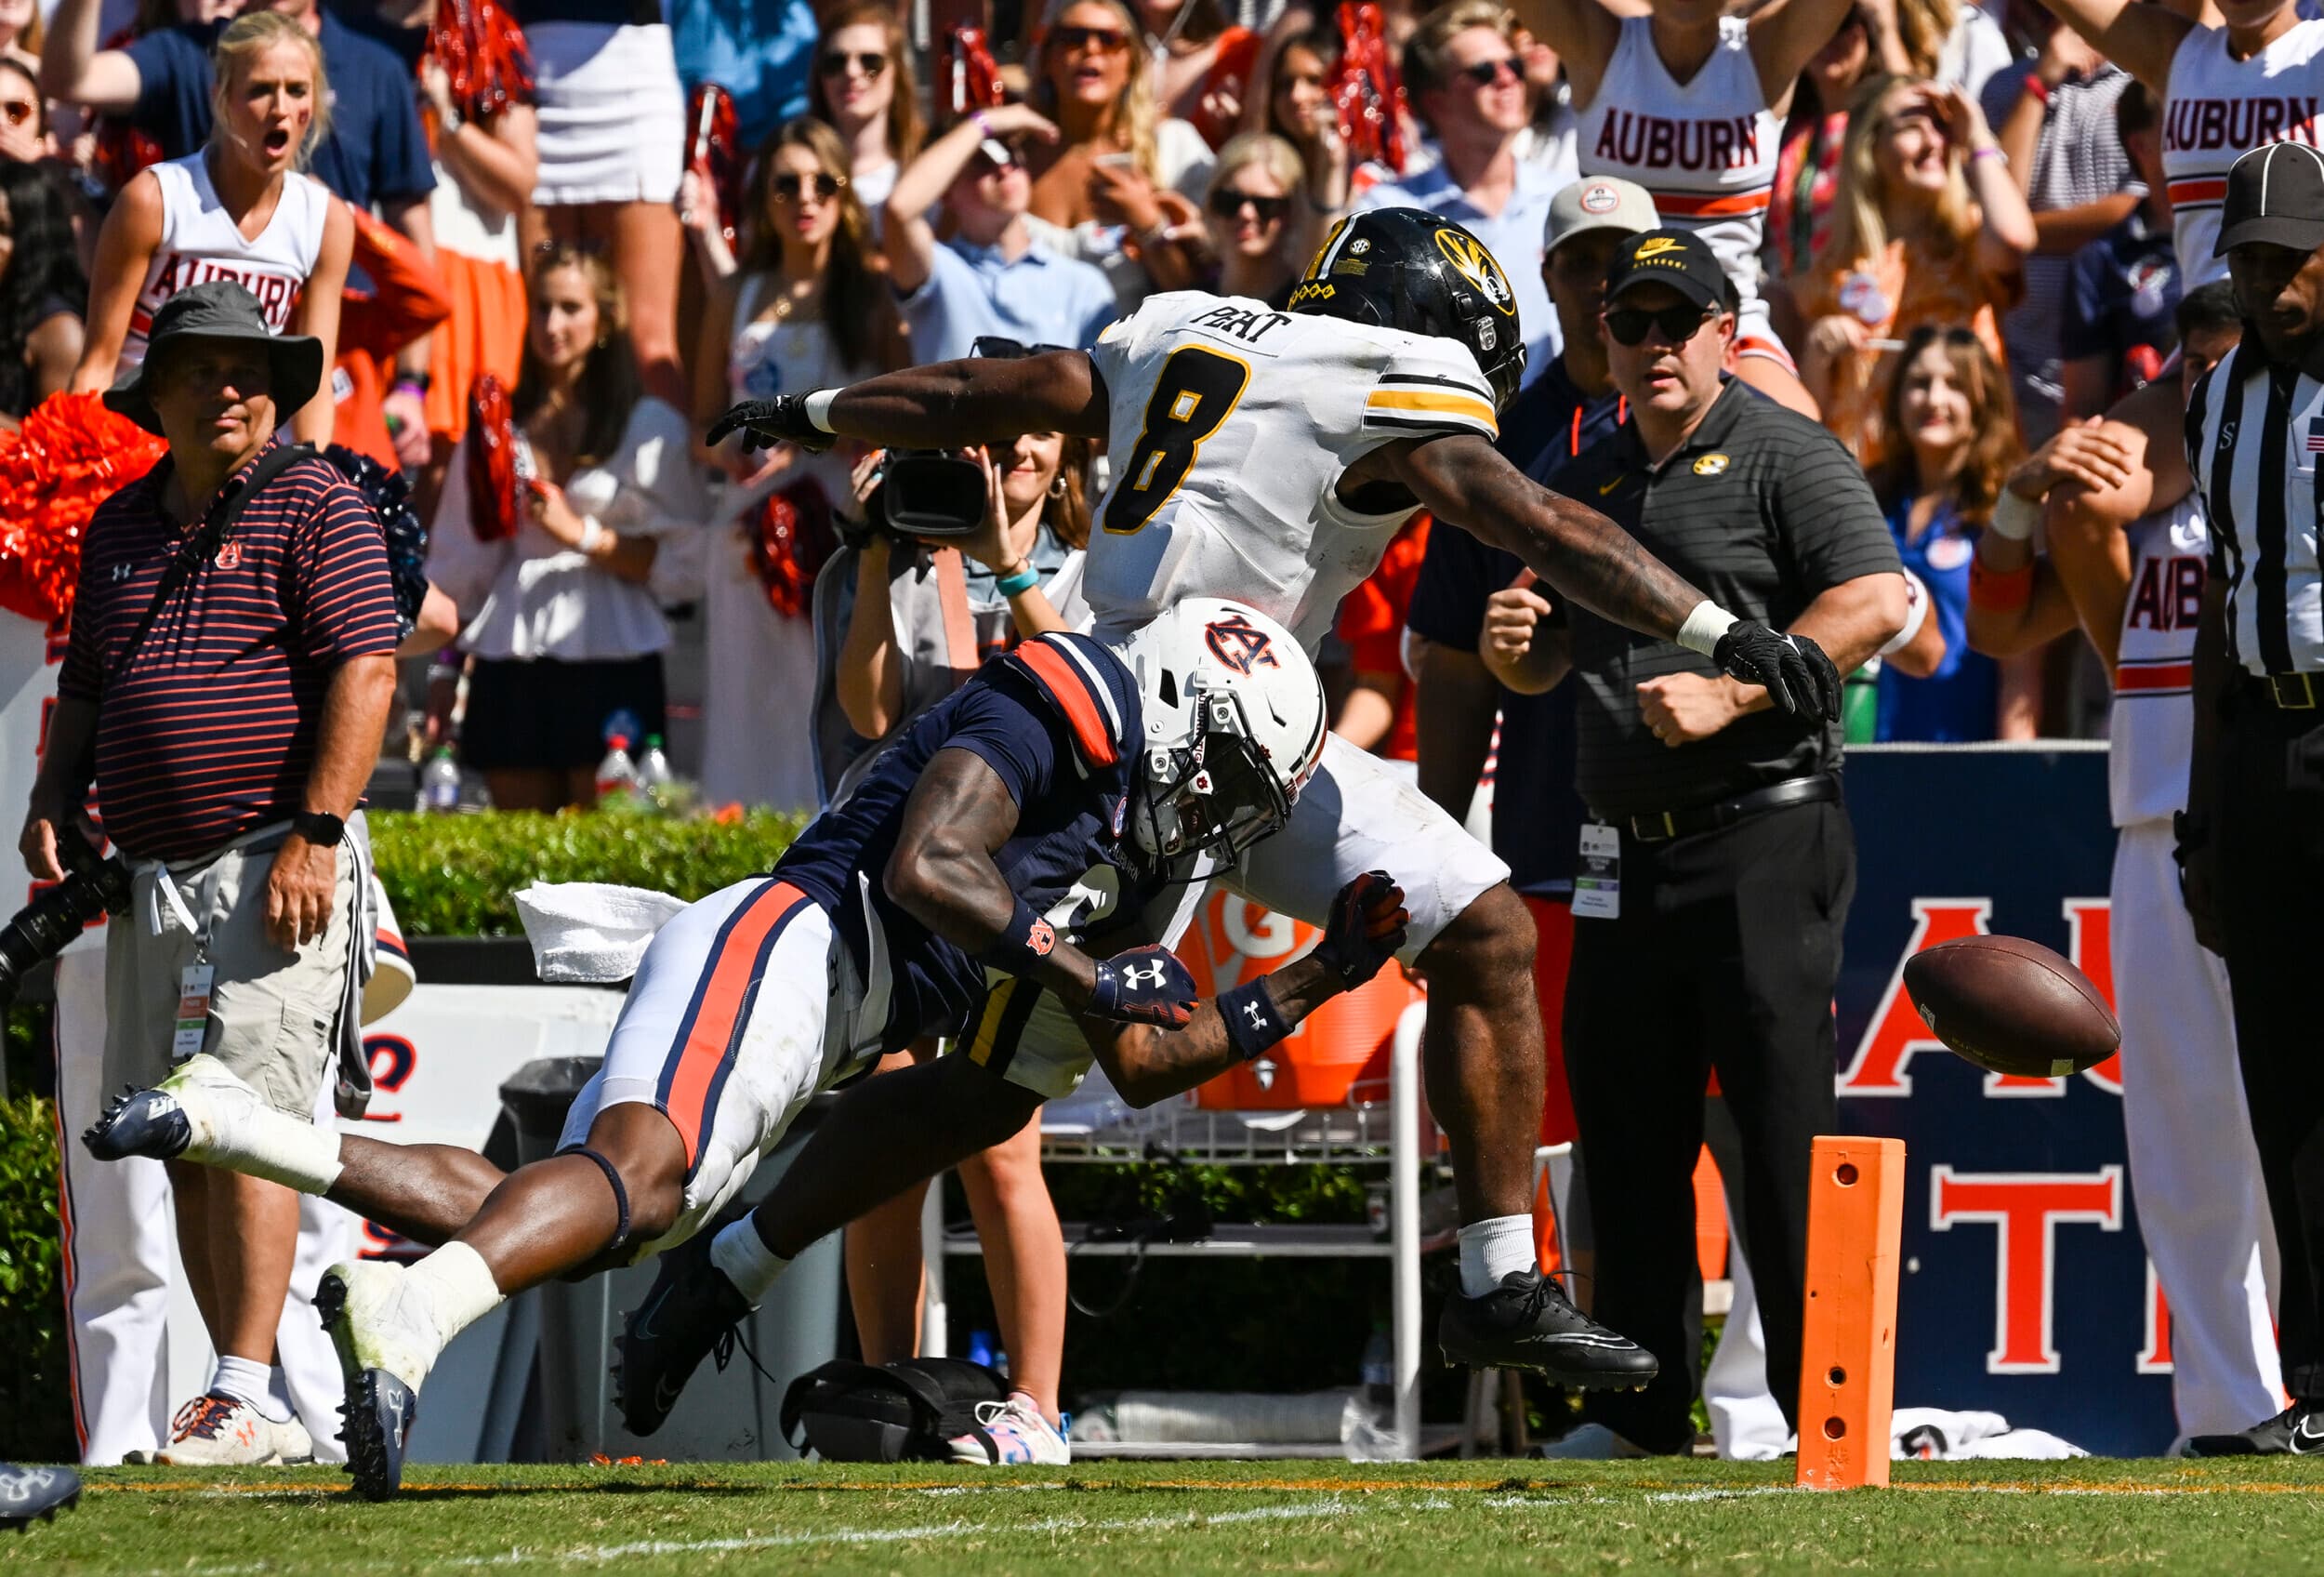 Sep 24, 2022; Auburn, Al, USA; Keionte Scott (6) forces fumble to win the game in overtime during the game between Auburn and Missouri at Jordan Hare Stadium.  Todd Van Emst/AU Athletics